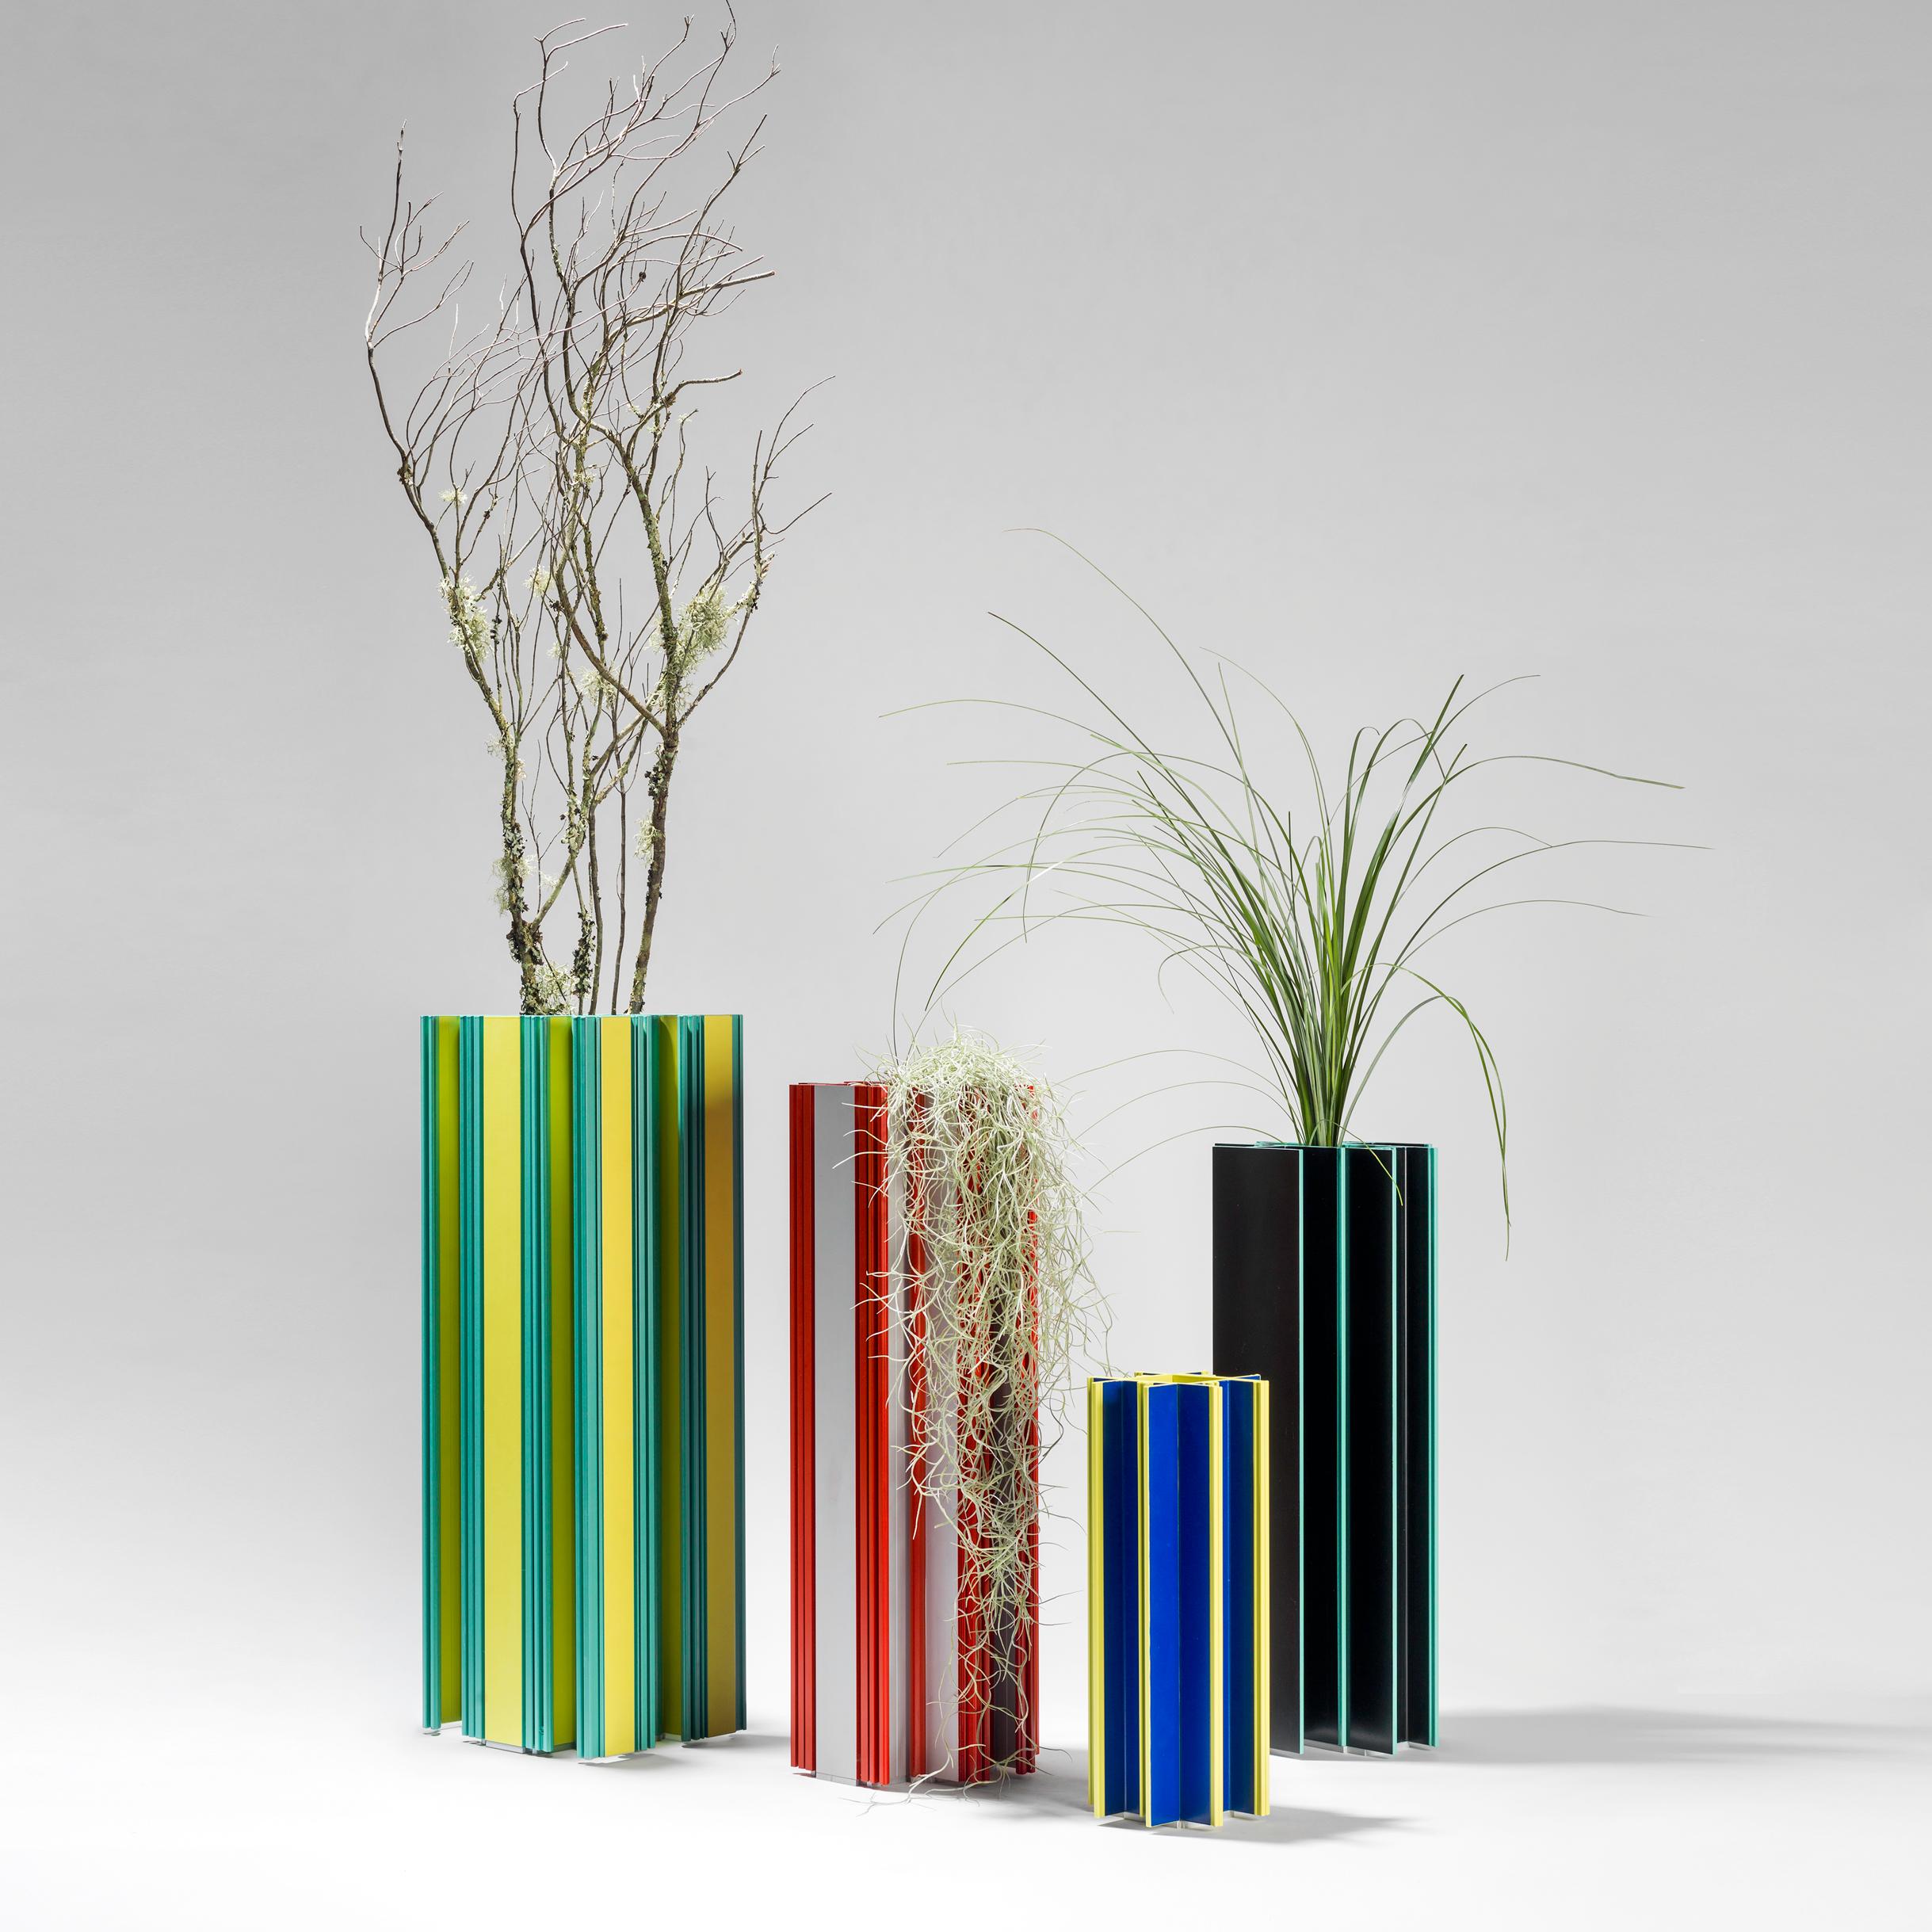 Extruded aluminum profiles painted in different colors and attached together. Anodized aluminum base. Pyrex container included on the inside.

Jorge Penadés has completed a new edition for the REmix Project (Vol. 3) created by BD Barcelona Design